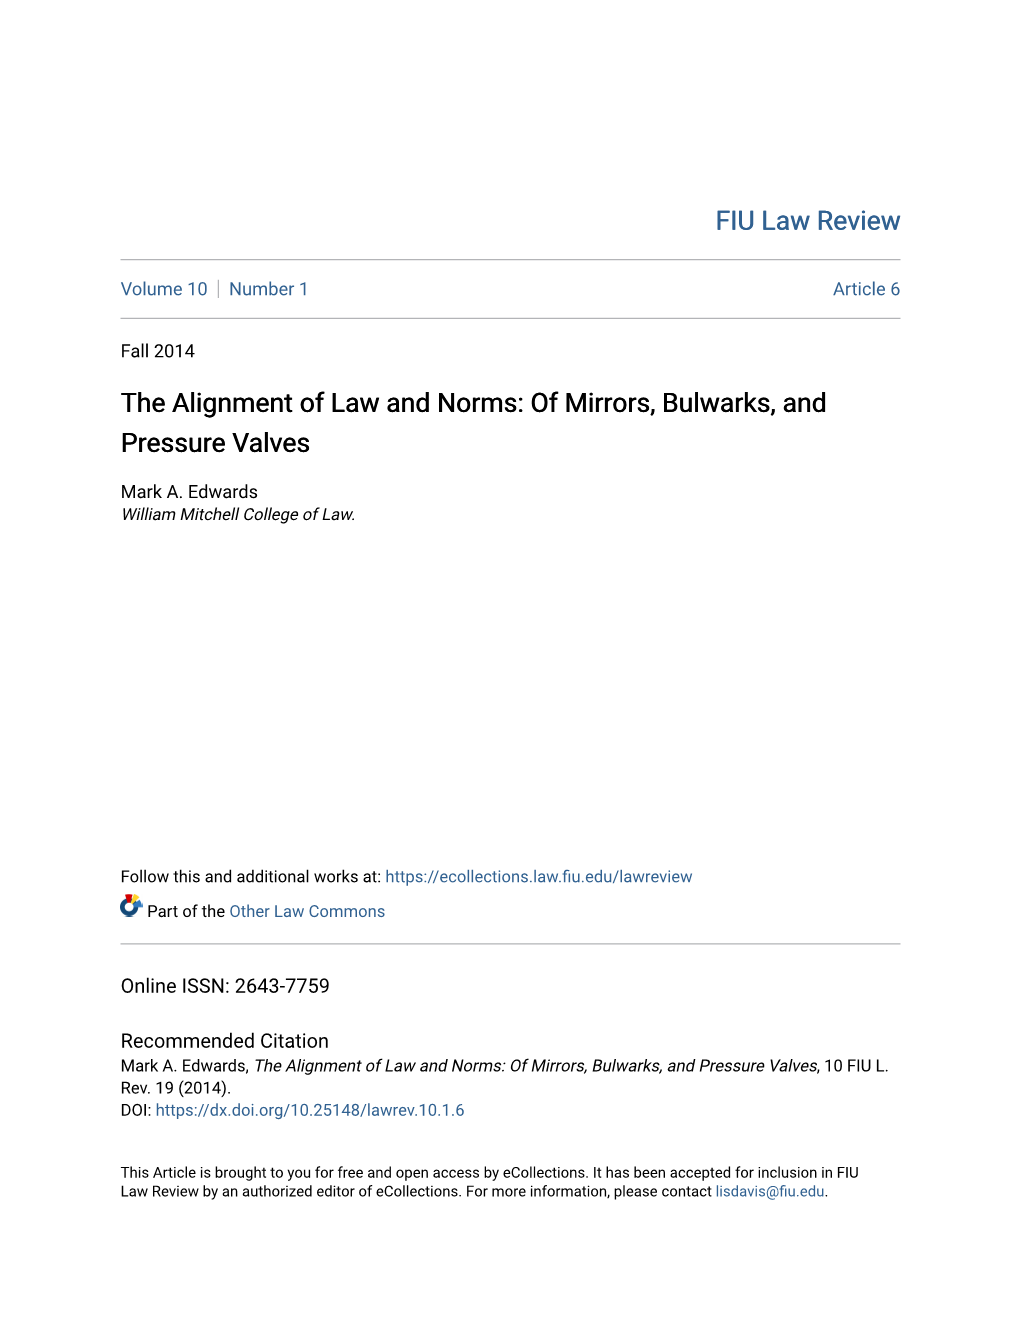 The Alignment of Law and Norms: of Mirrors, Bulwarks, and Pressure Valves